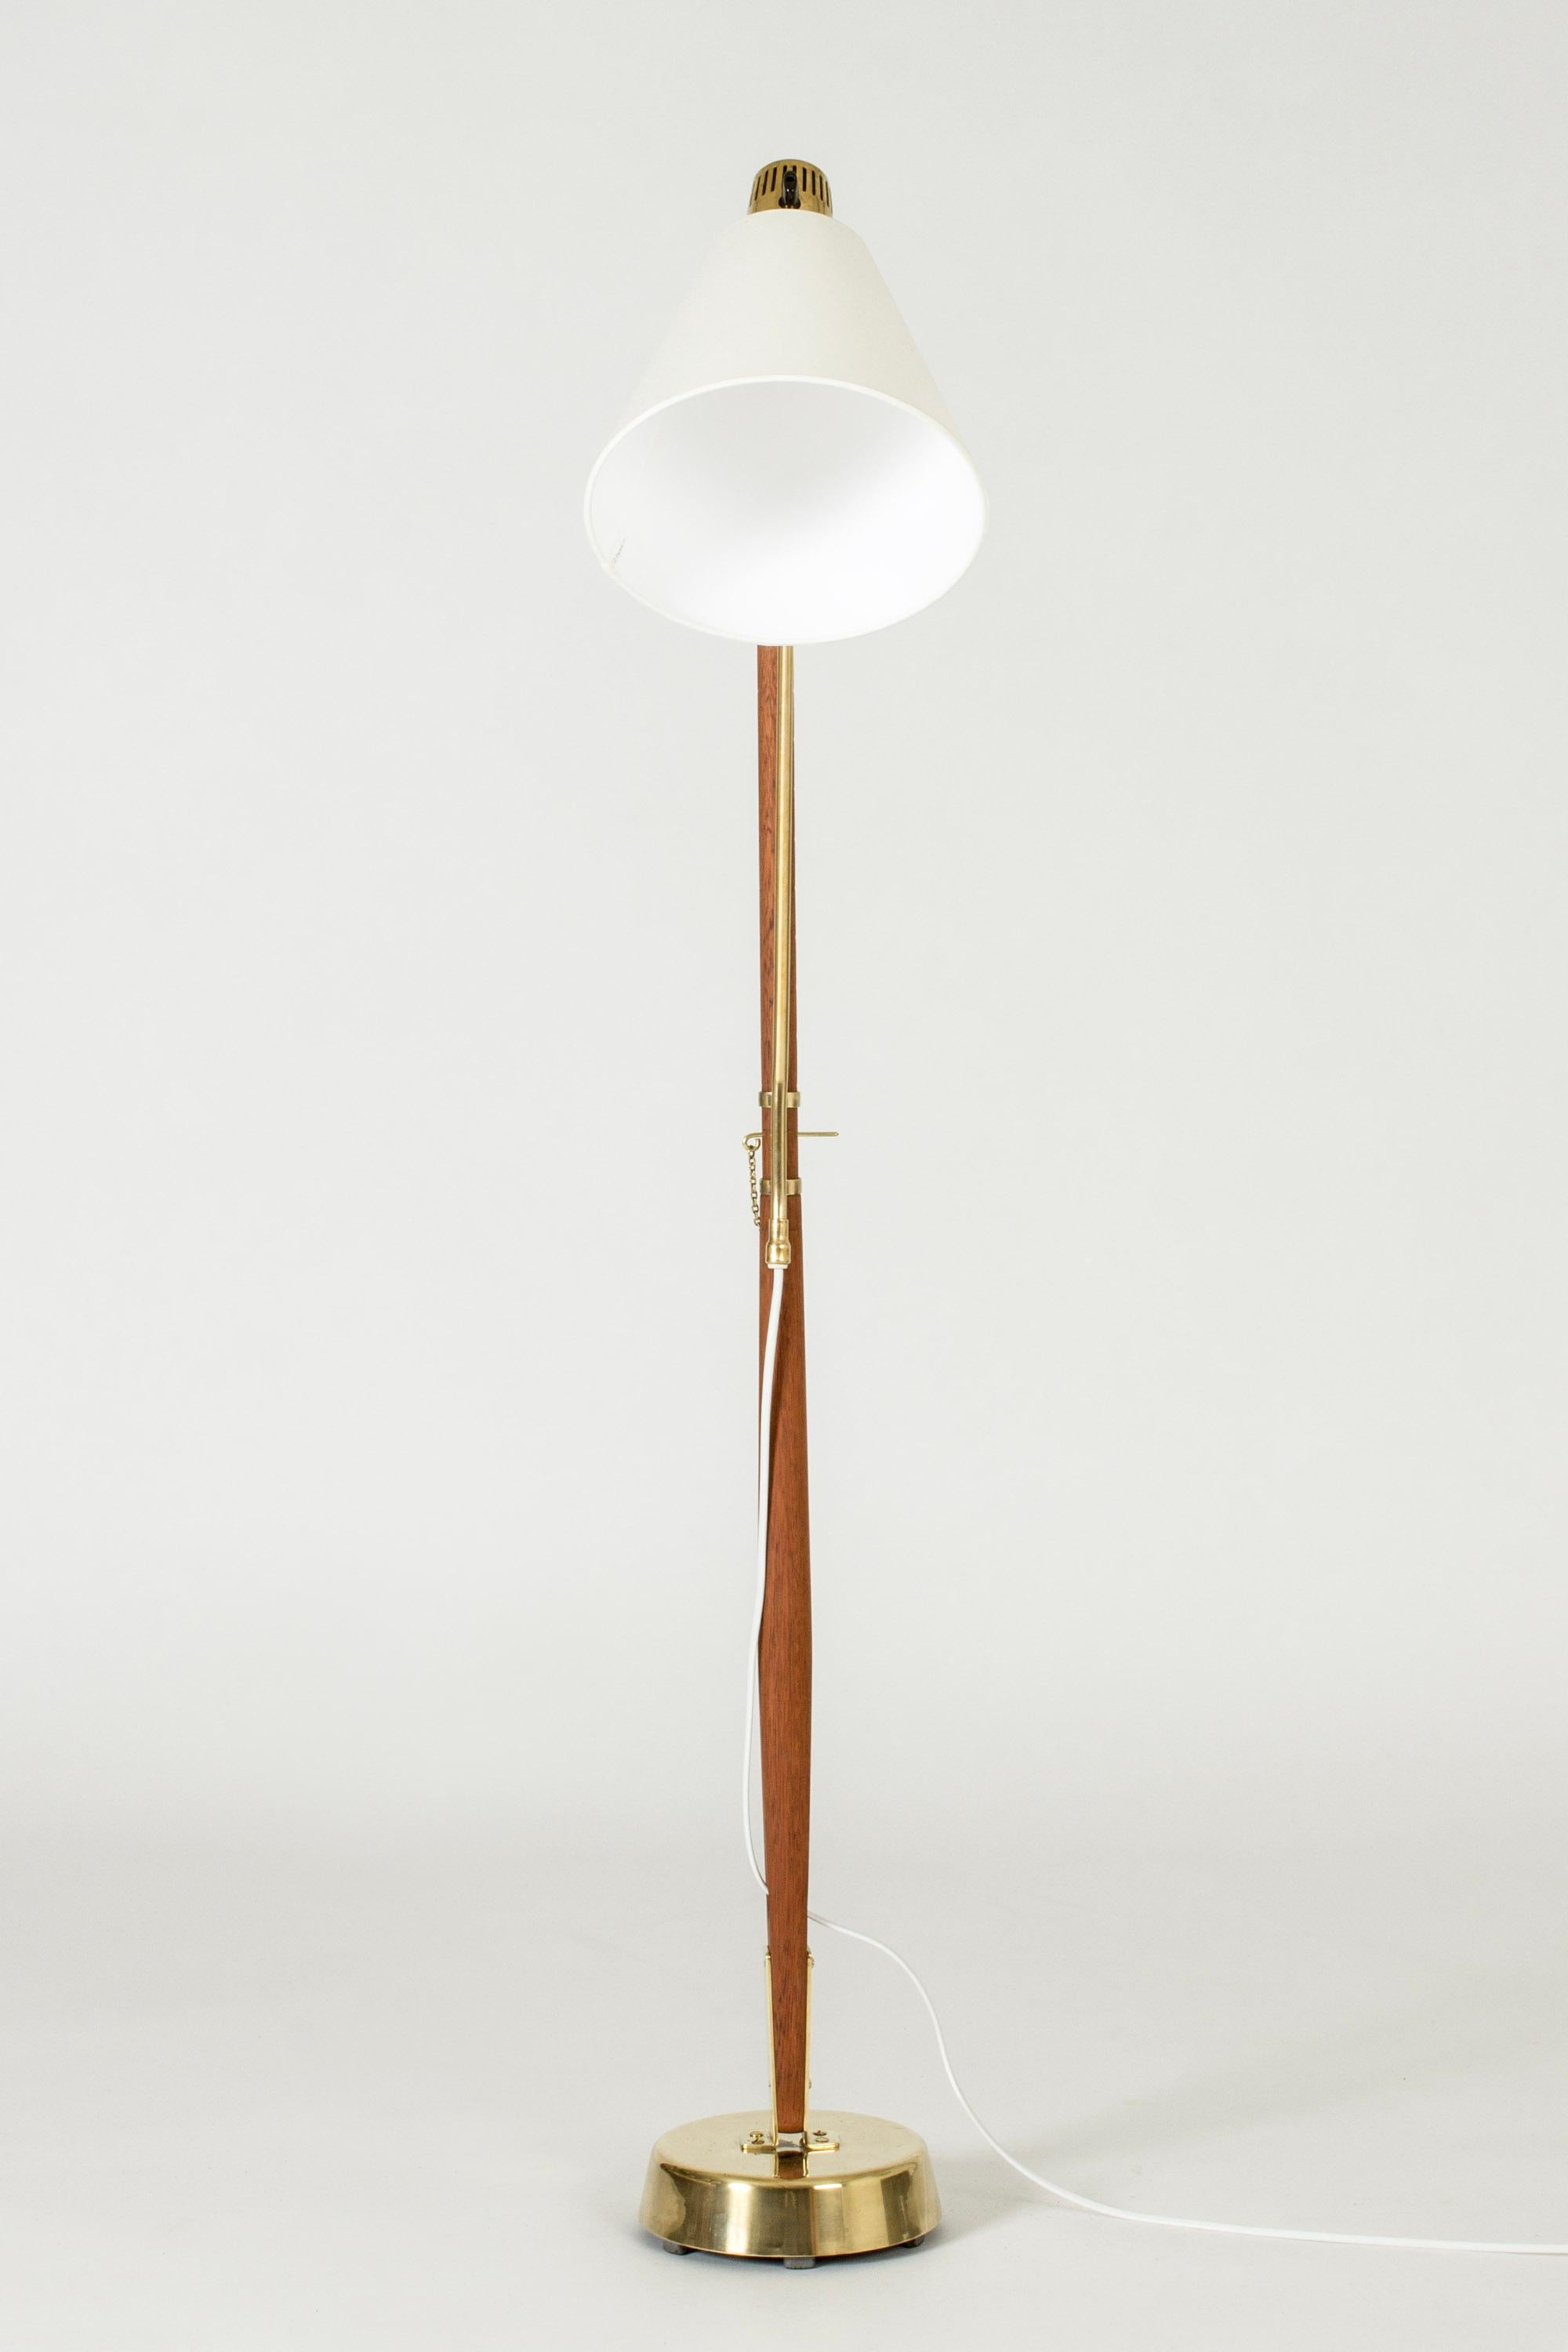 Cool floor lamp by Hans Bergström, made from brass and teak. Adjustable height, elegantly set with a brass key that is attached with a decorative chain.

Size: height 126-155 cm


About Hans Bergström: 
Hans Bergström was the owner and